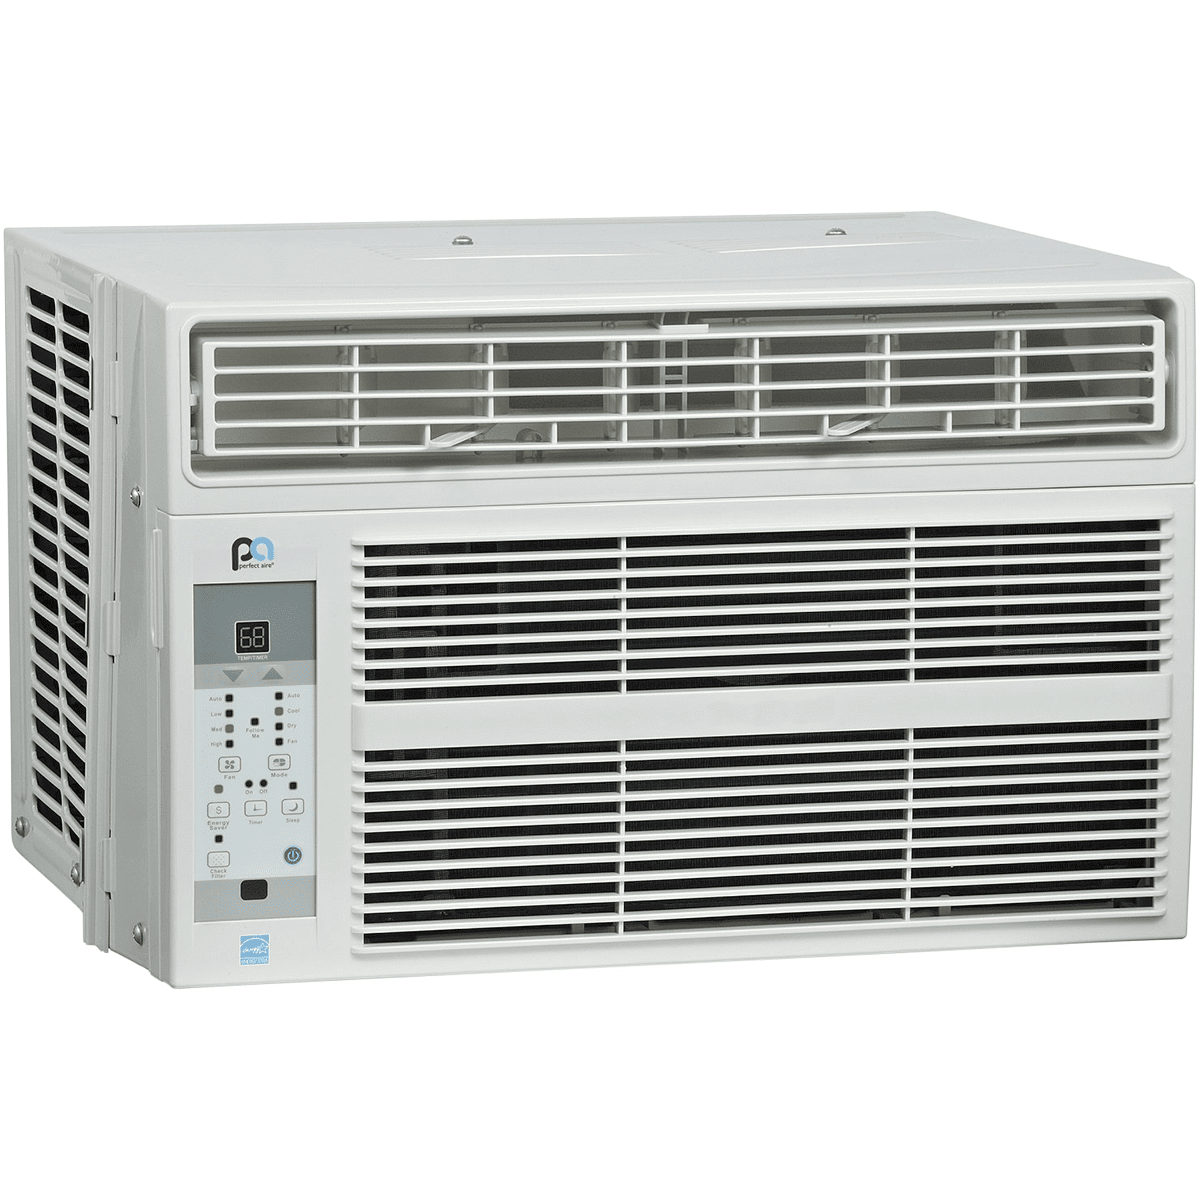 Perfect Aire 6,000 Btu Window Air Conditioner (5pac6000)